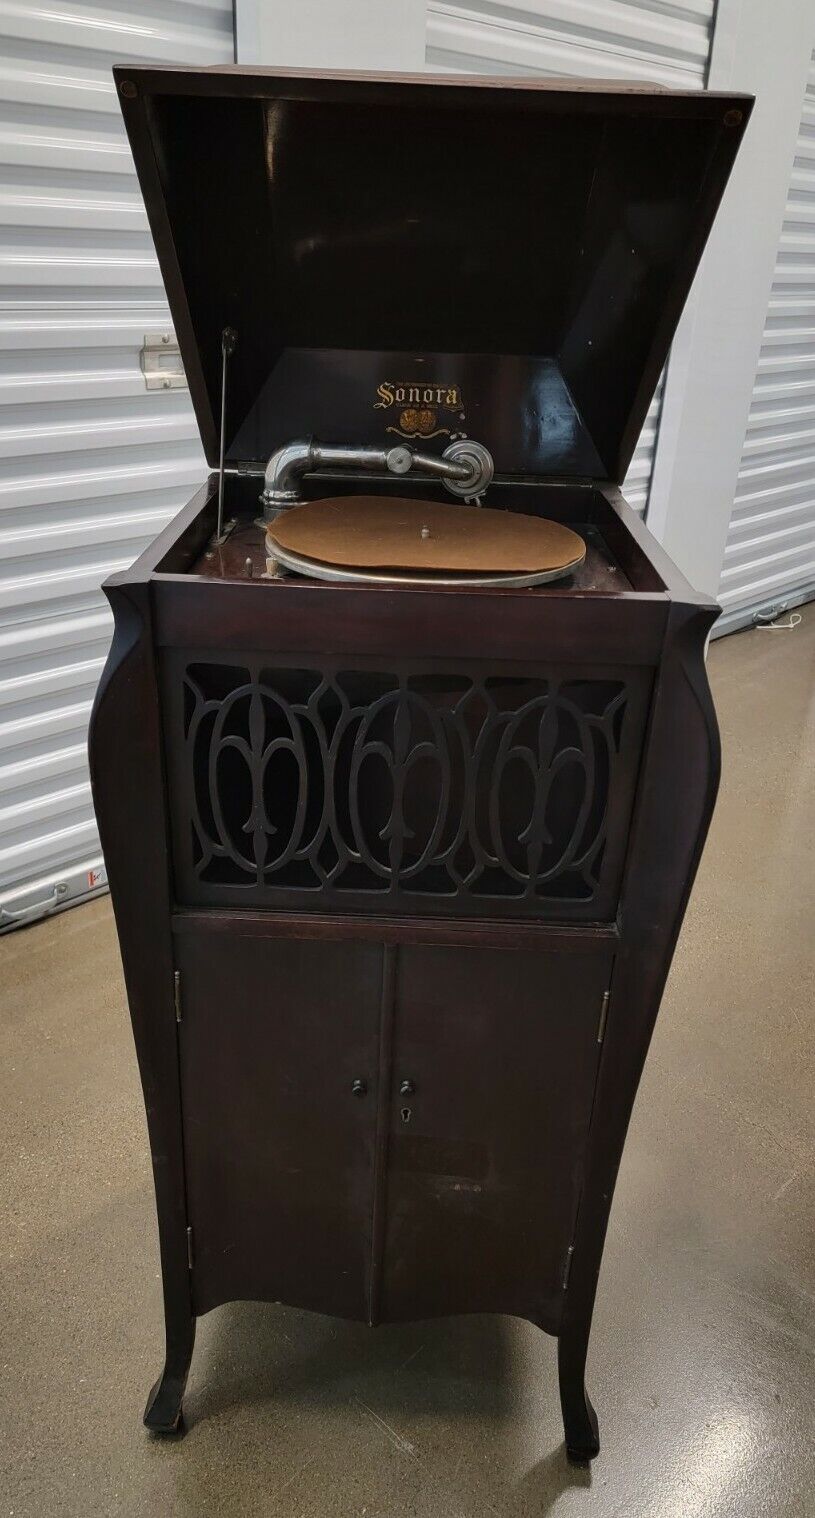 Antique Sonora Hand Crank Phonograph Minuet, Dated 07/1919